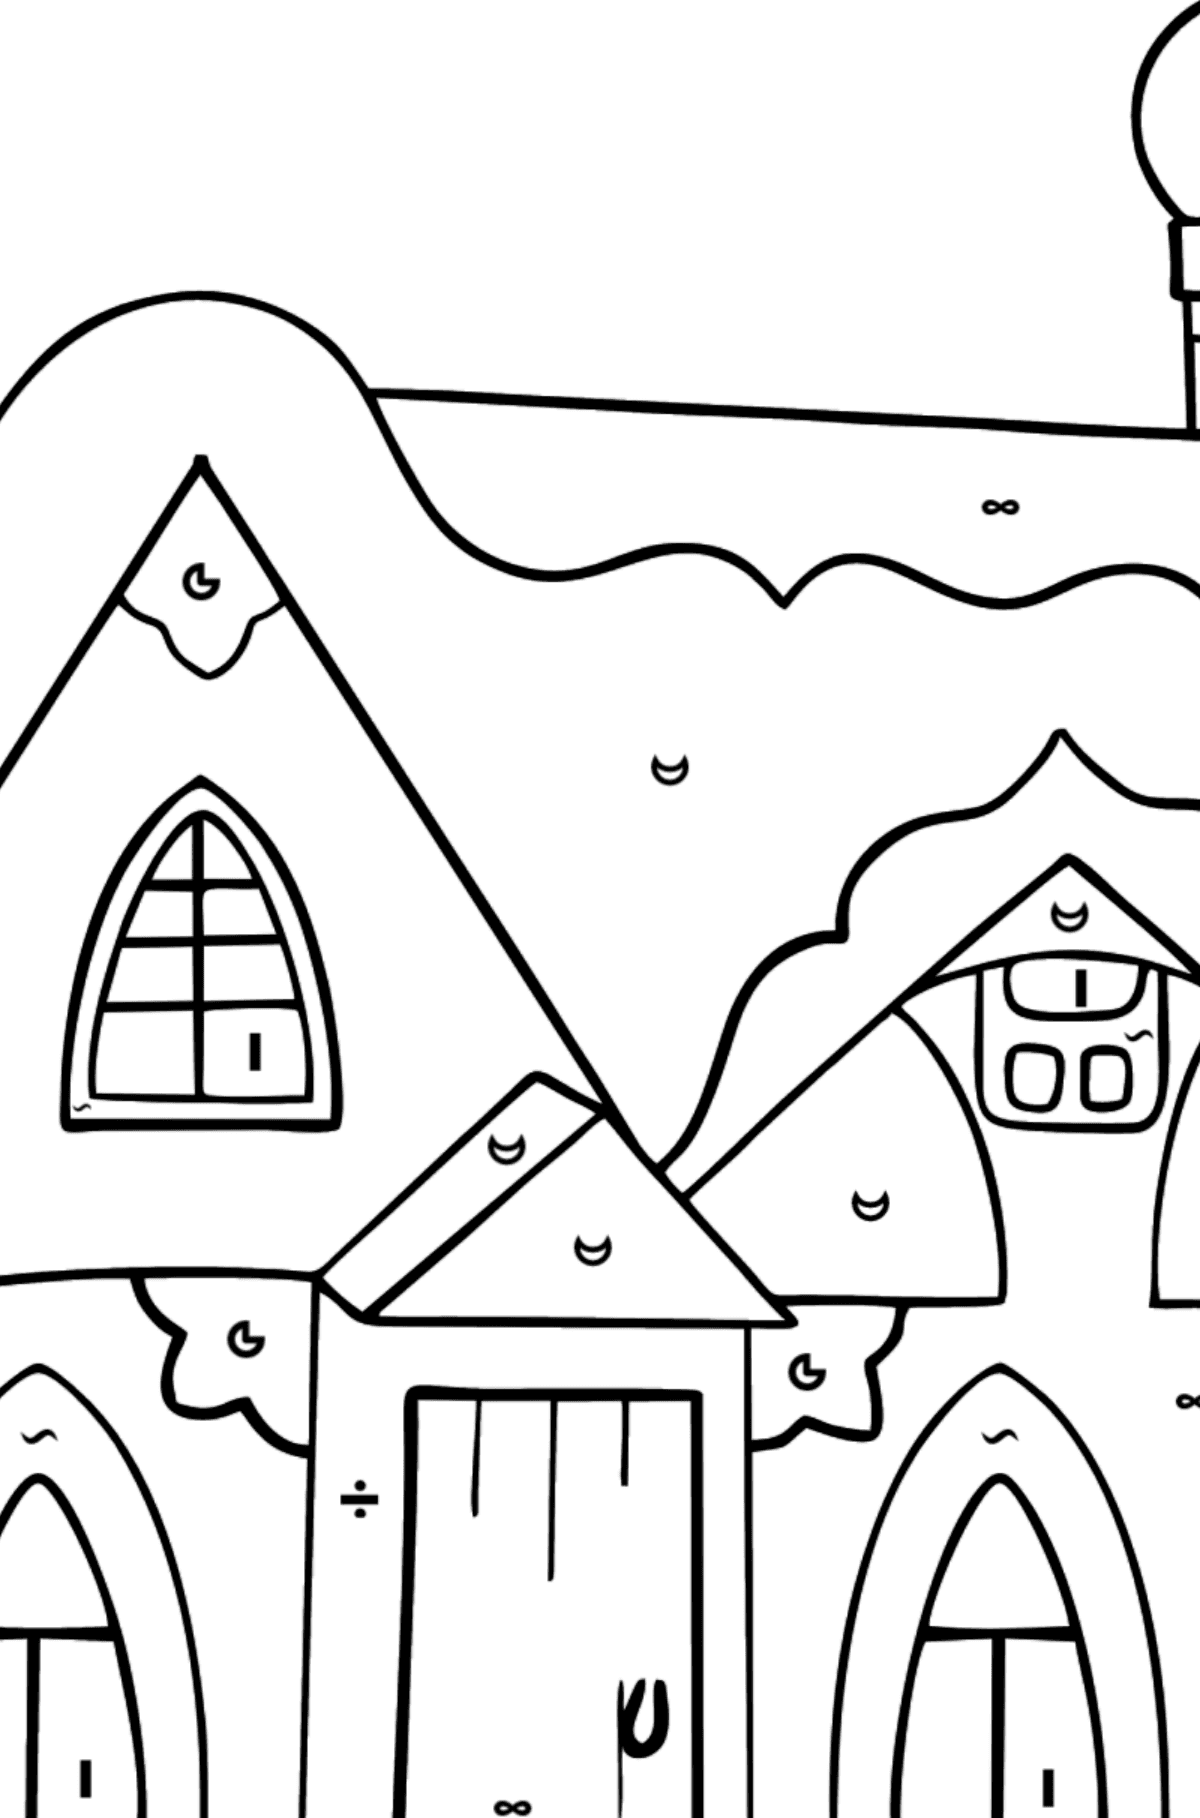 Coloring Page - A Fairytale House - Coloring by Symbols and Geometric Shapes for Kids